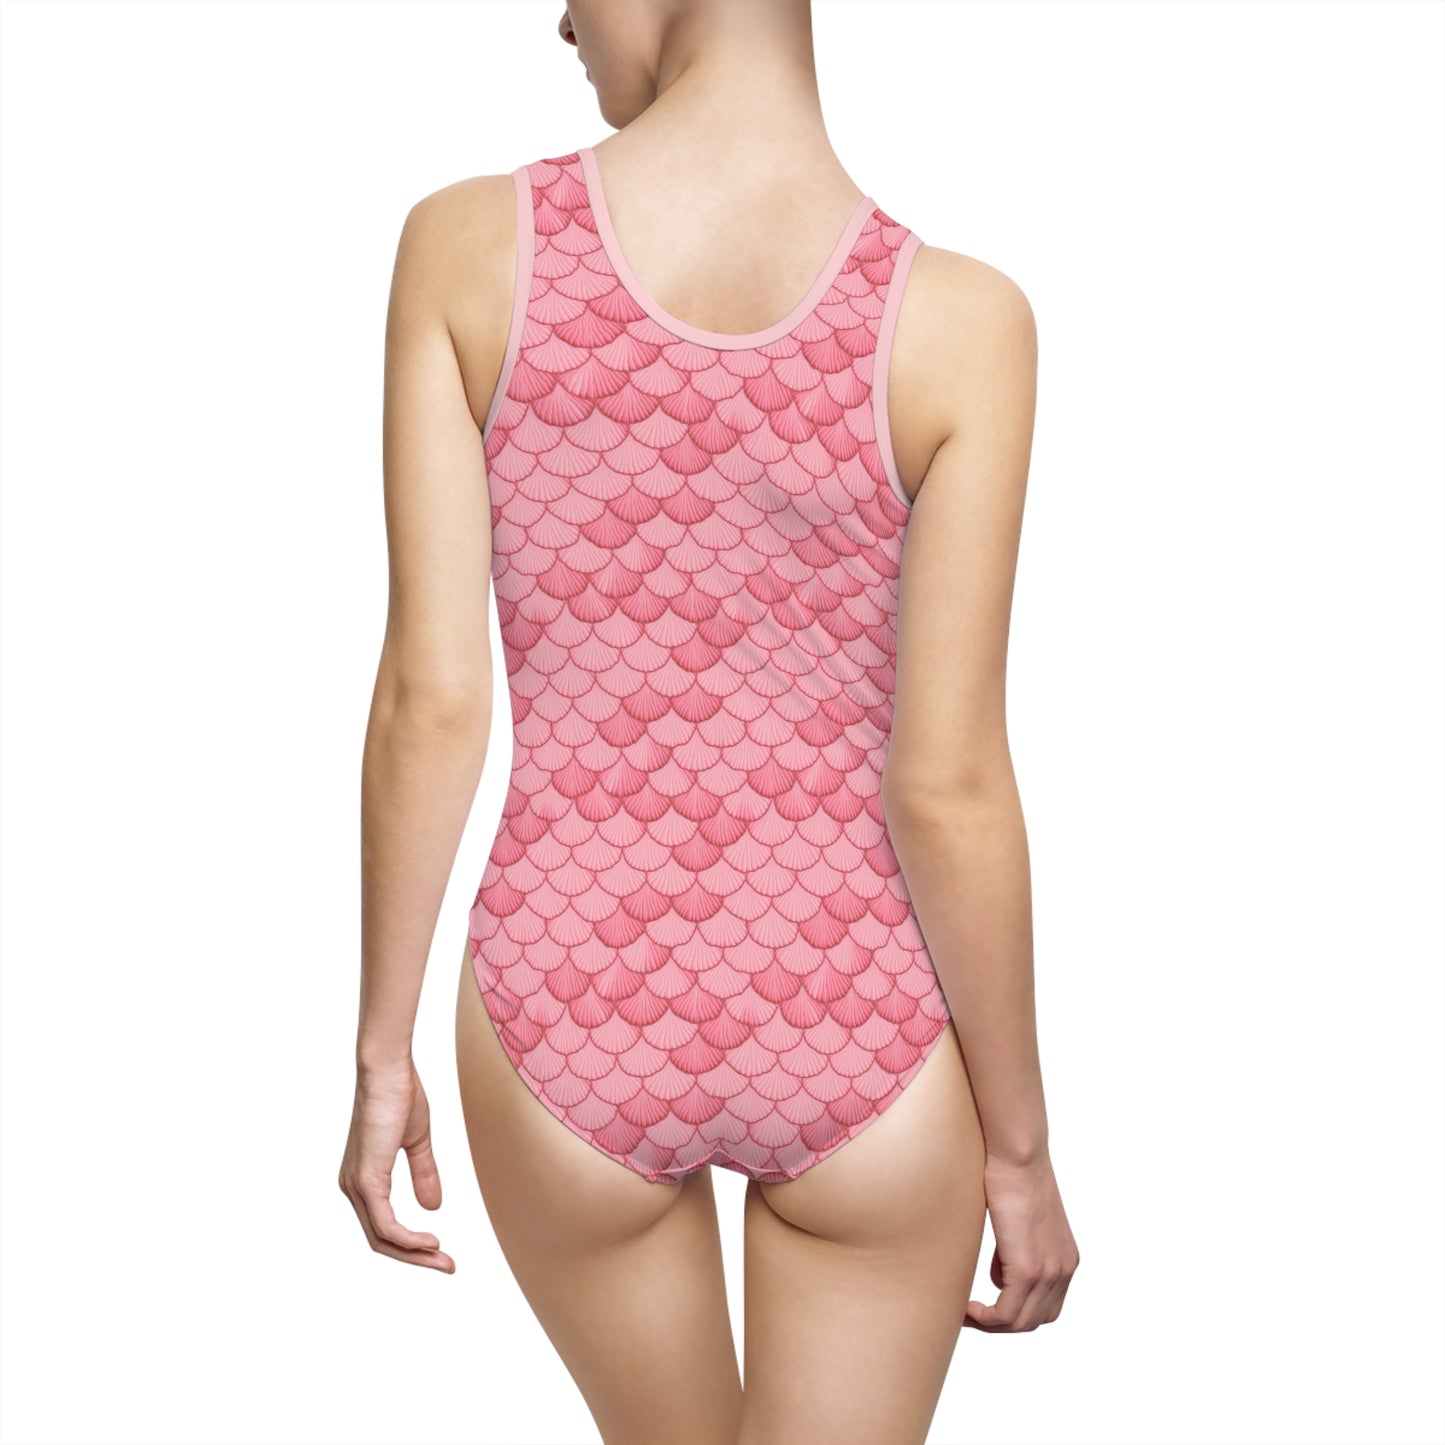 Pink Seashell Mermaid Women's One-Piece Swimsuit Embrace the Enchantment of the Ocean! Classic Swimwear for any Ocean Enthusiast Woman or Girl